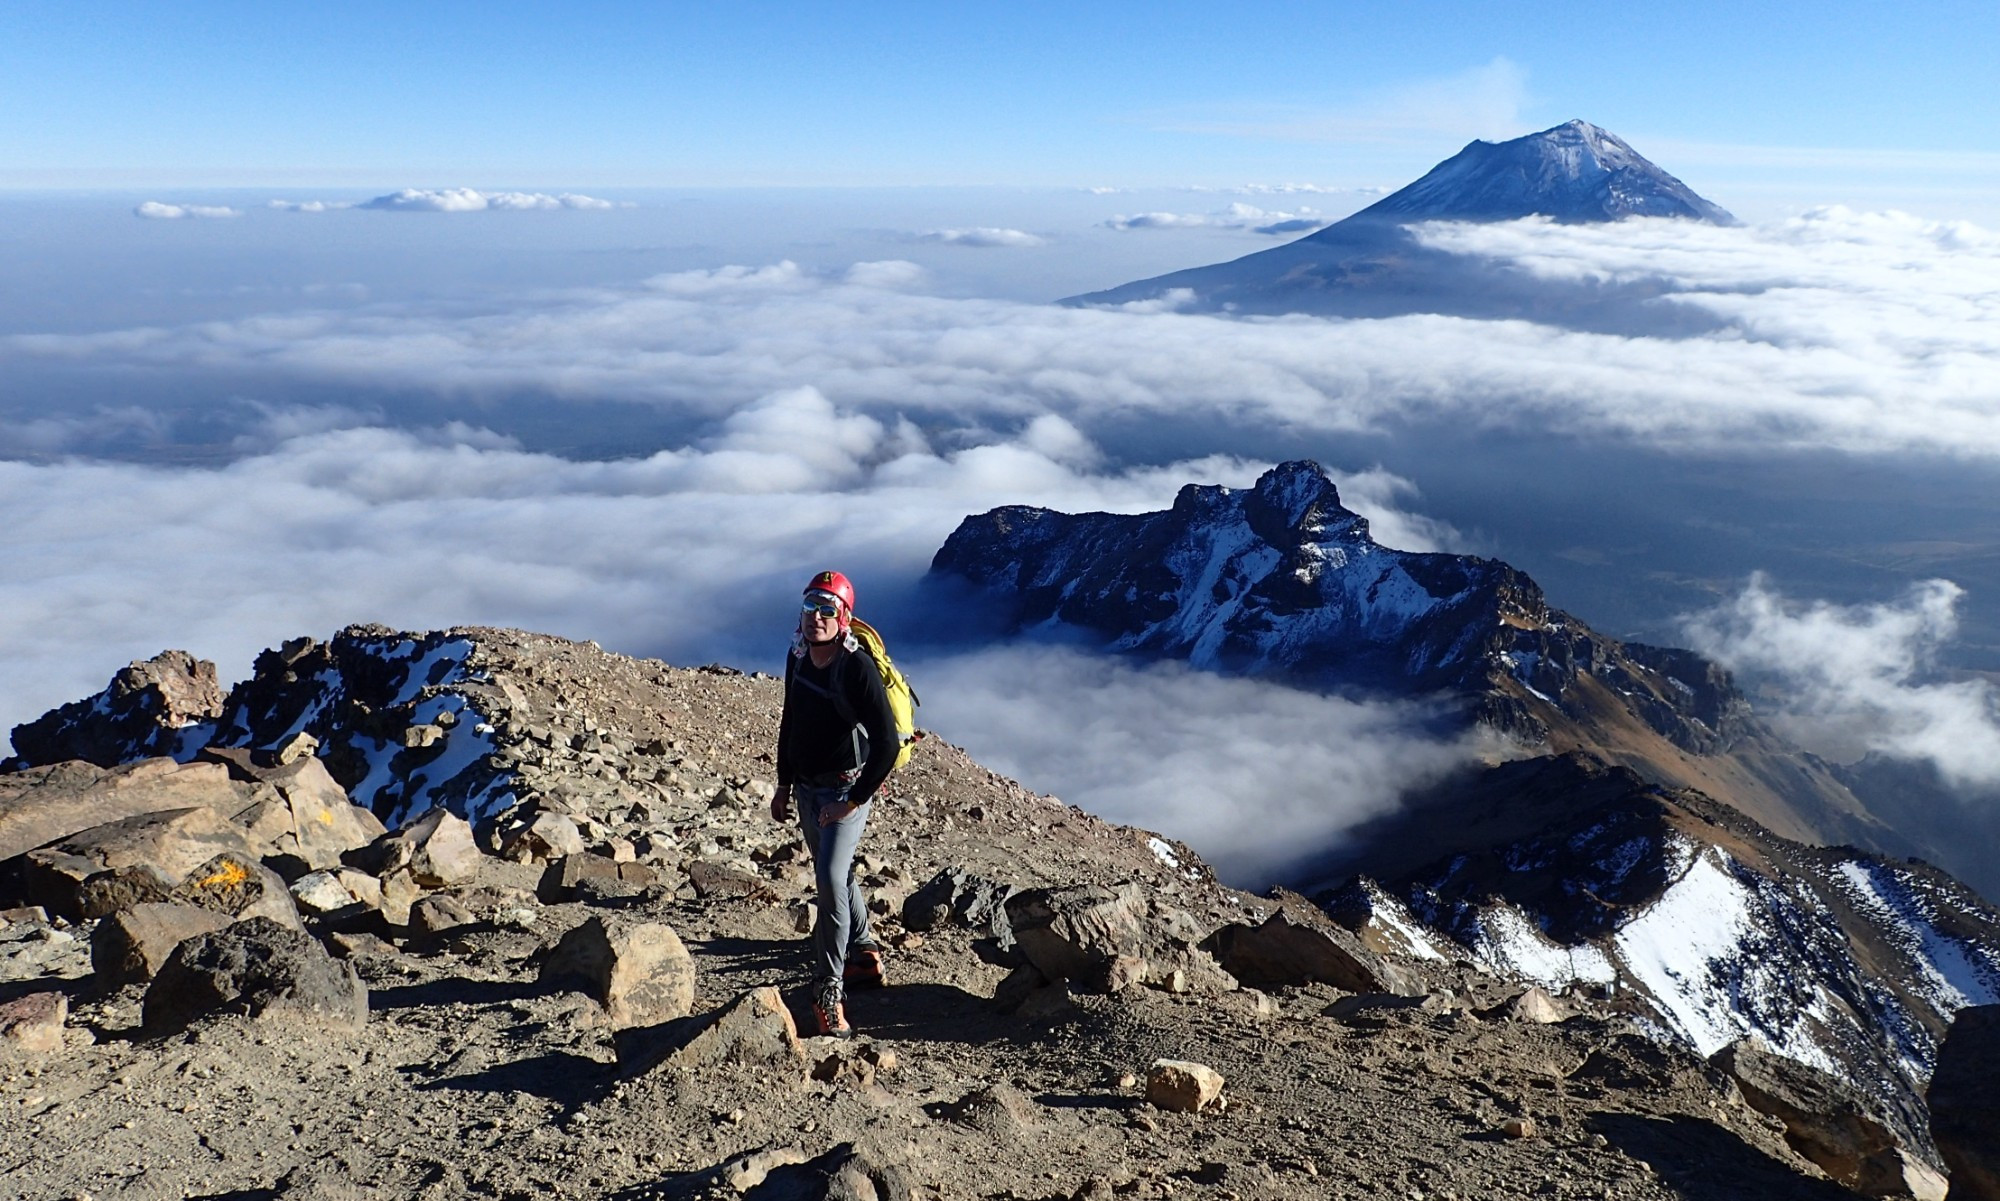 Louie on the summit ridge of 17150-foot Ixtaccihuatl volcano with views of Popocatepetl volcano in the clouds, State of Mexico, Mexico